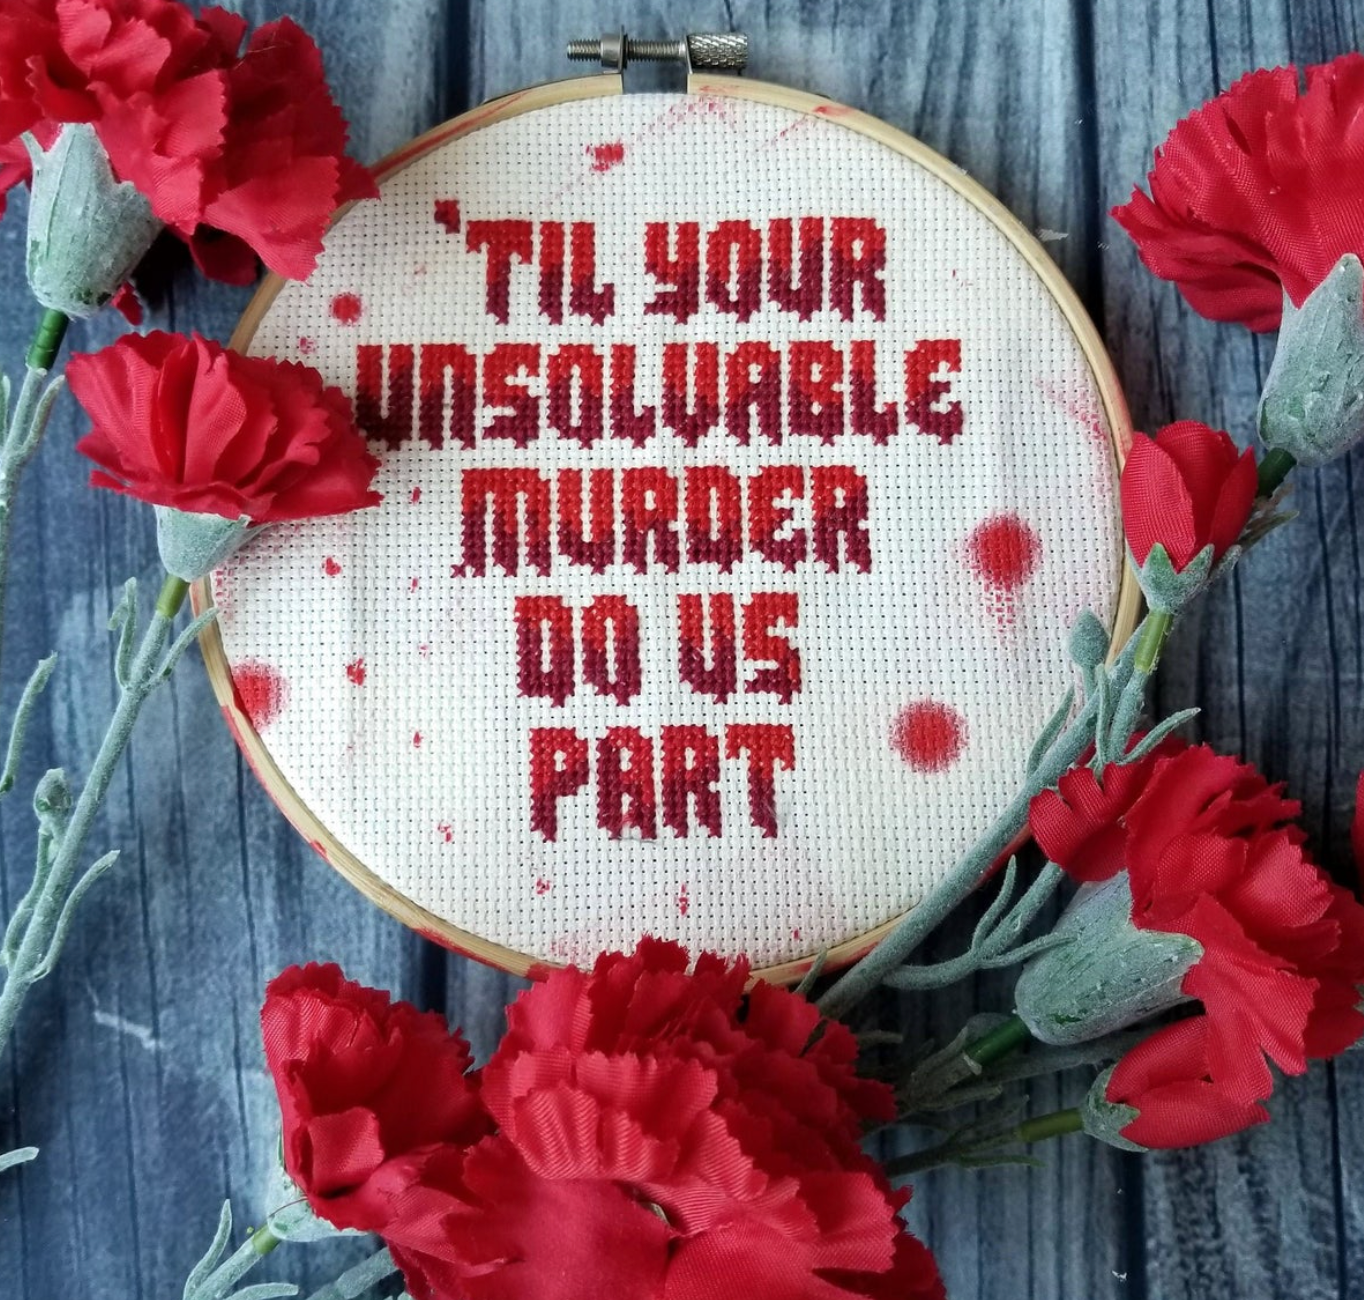 blood dripping embroidered text that says 'til your unsolvable murder do us part